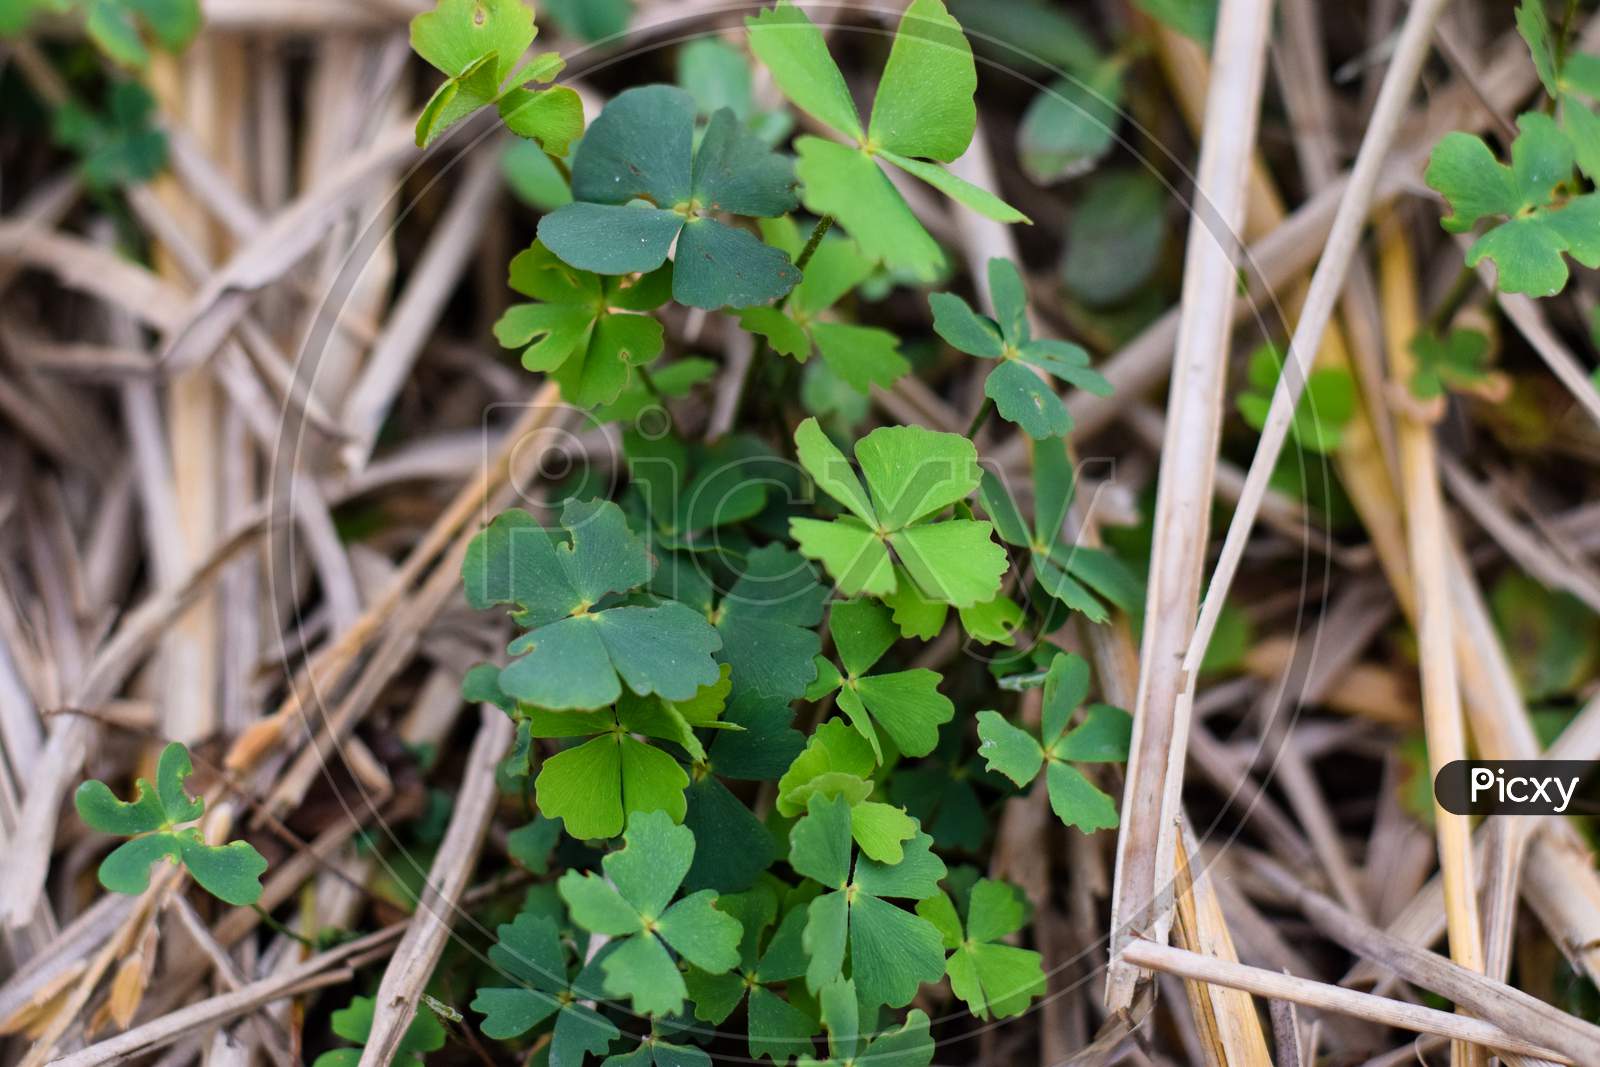 Marsilea Is A Genus Of Approximately 65 Species Of Aquatic Ferns Of The Family Marsileaceae